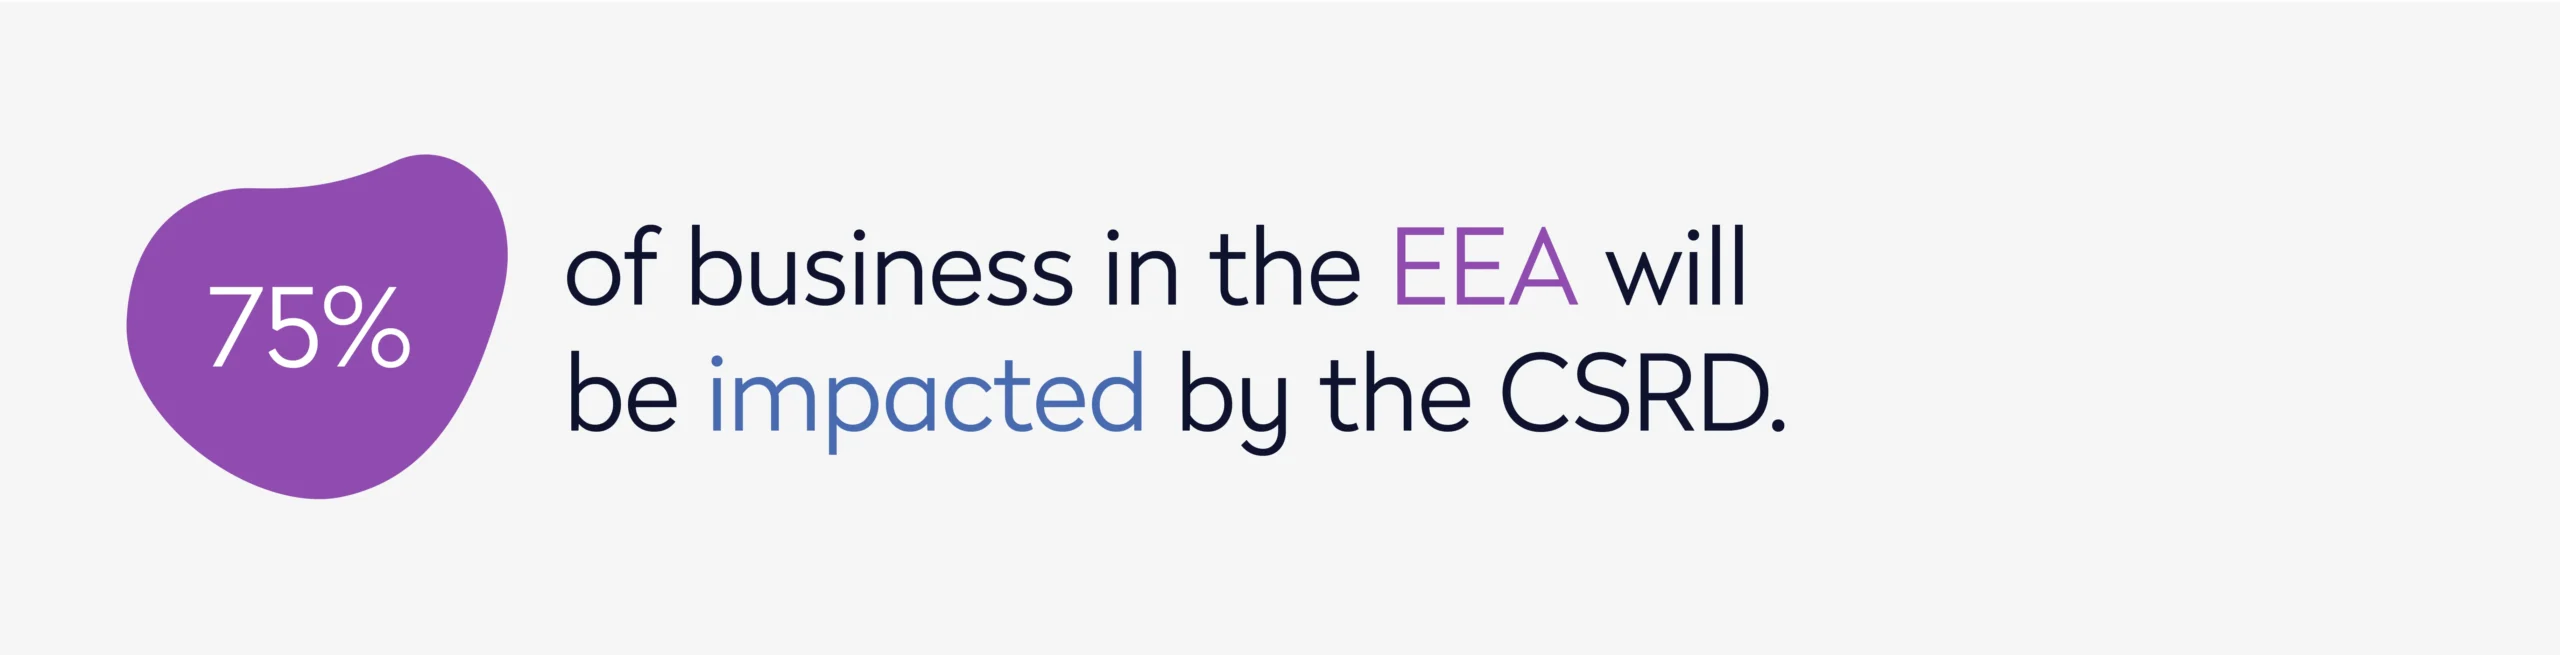 75 percent of business in the EEA will be impacted by the CSRD